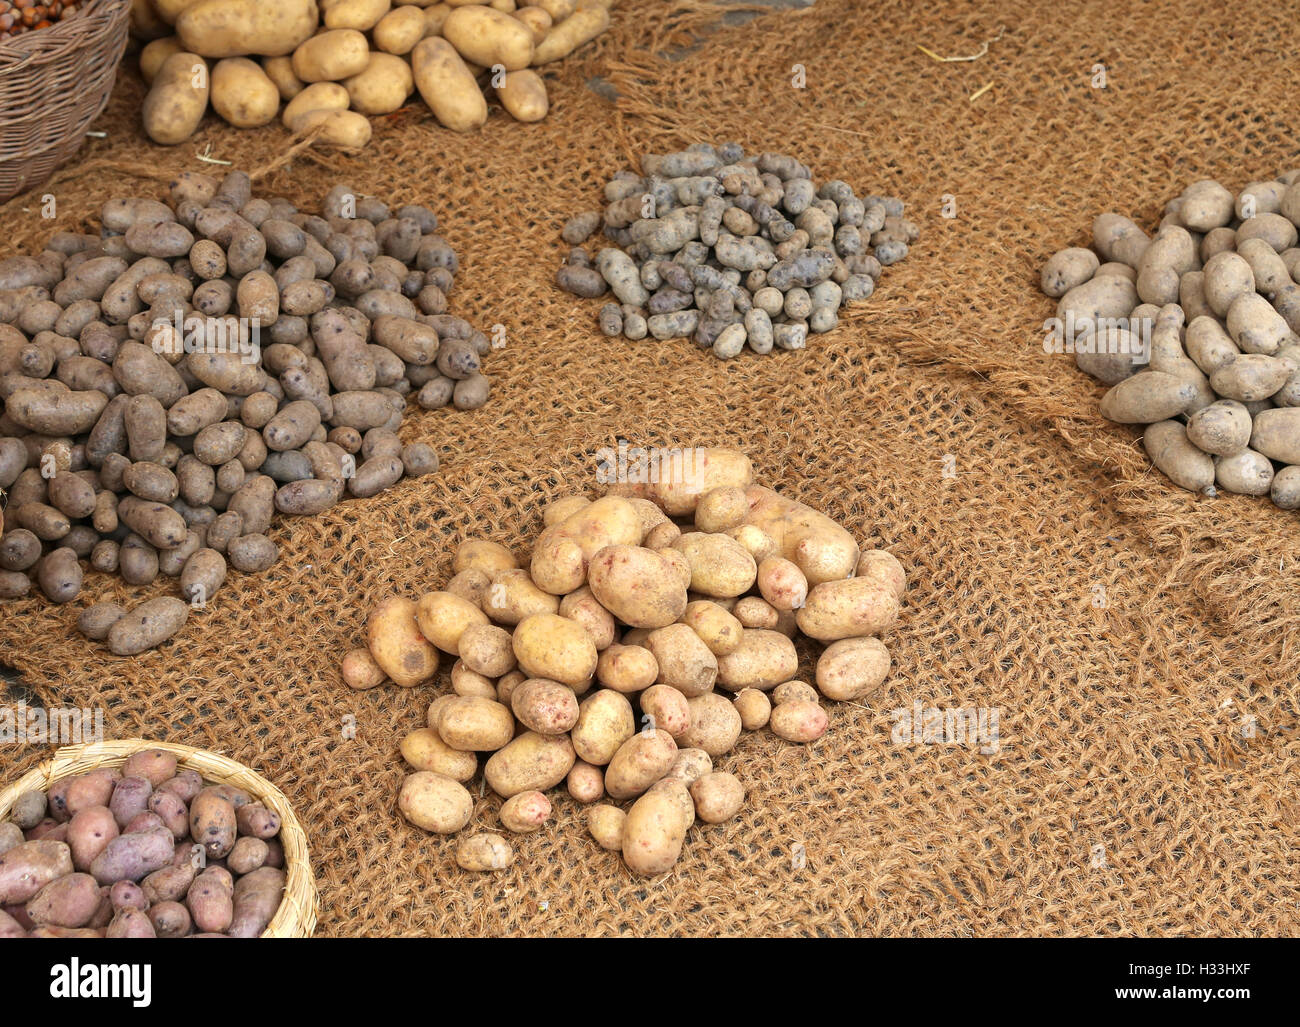 raw Potatoes in a variety of colors and size for sale Stock Photo